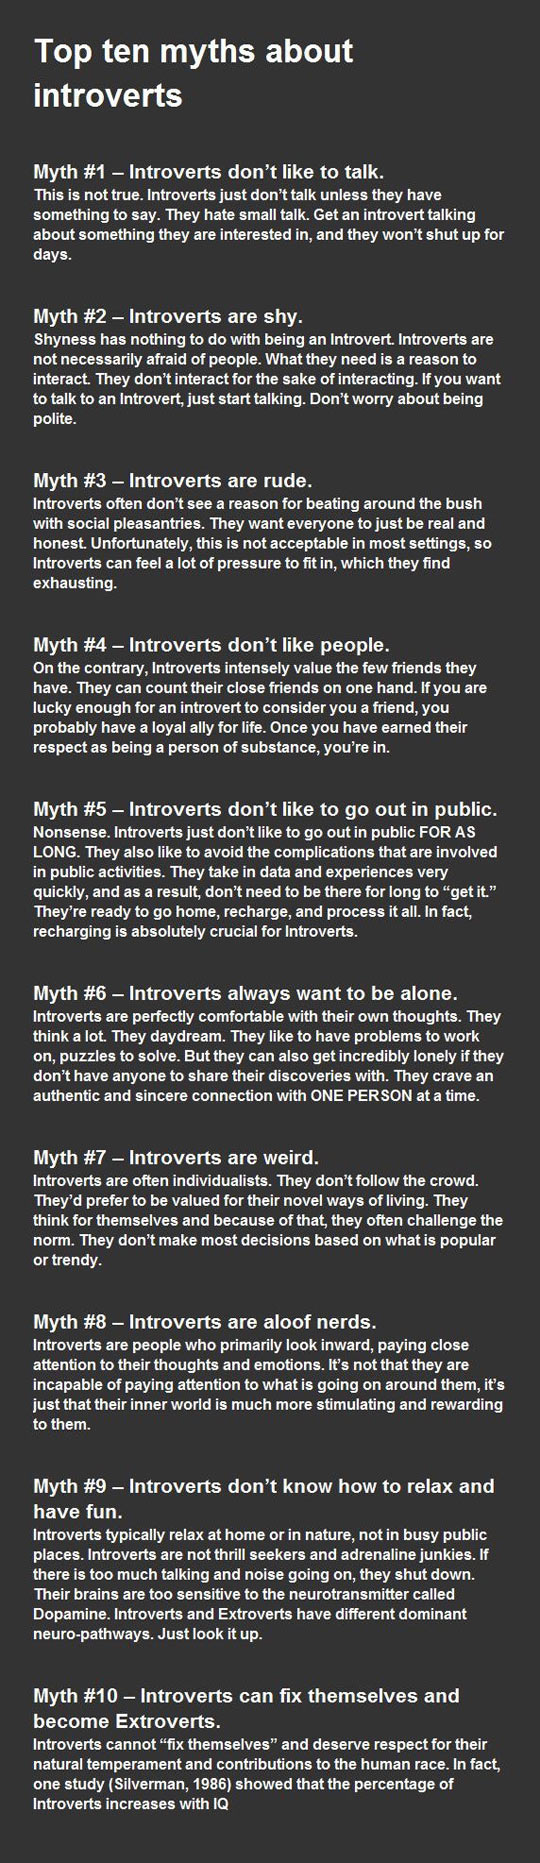 Myths About Introverts